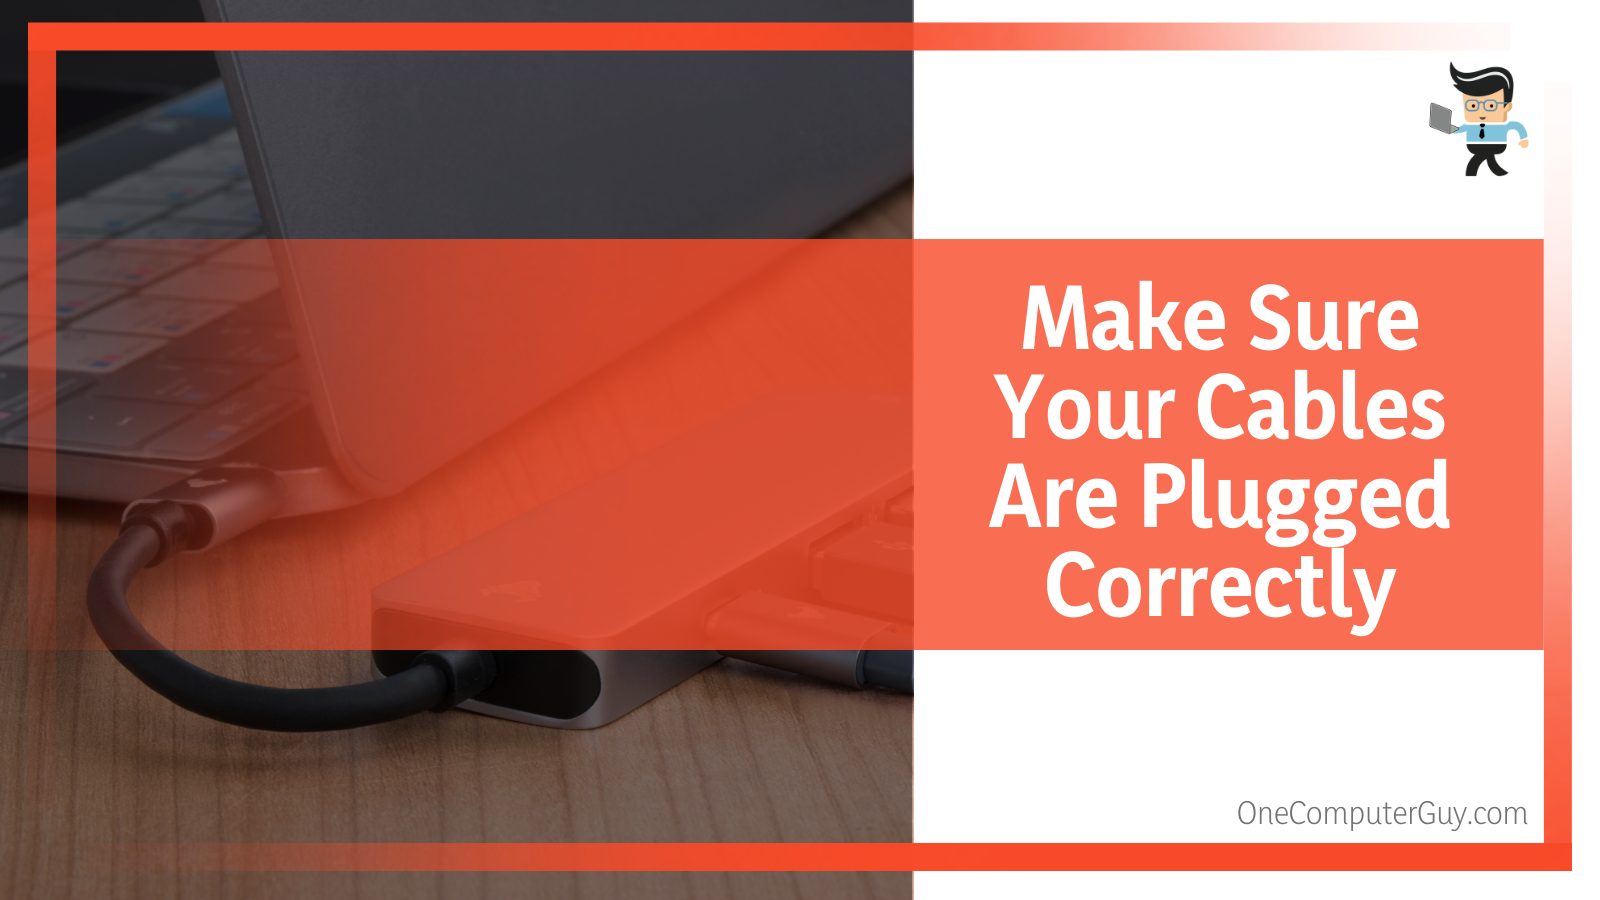 Make Sure Your Cables Are Plugged Correctly